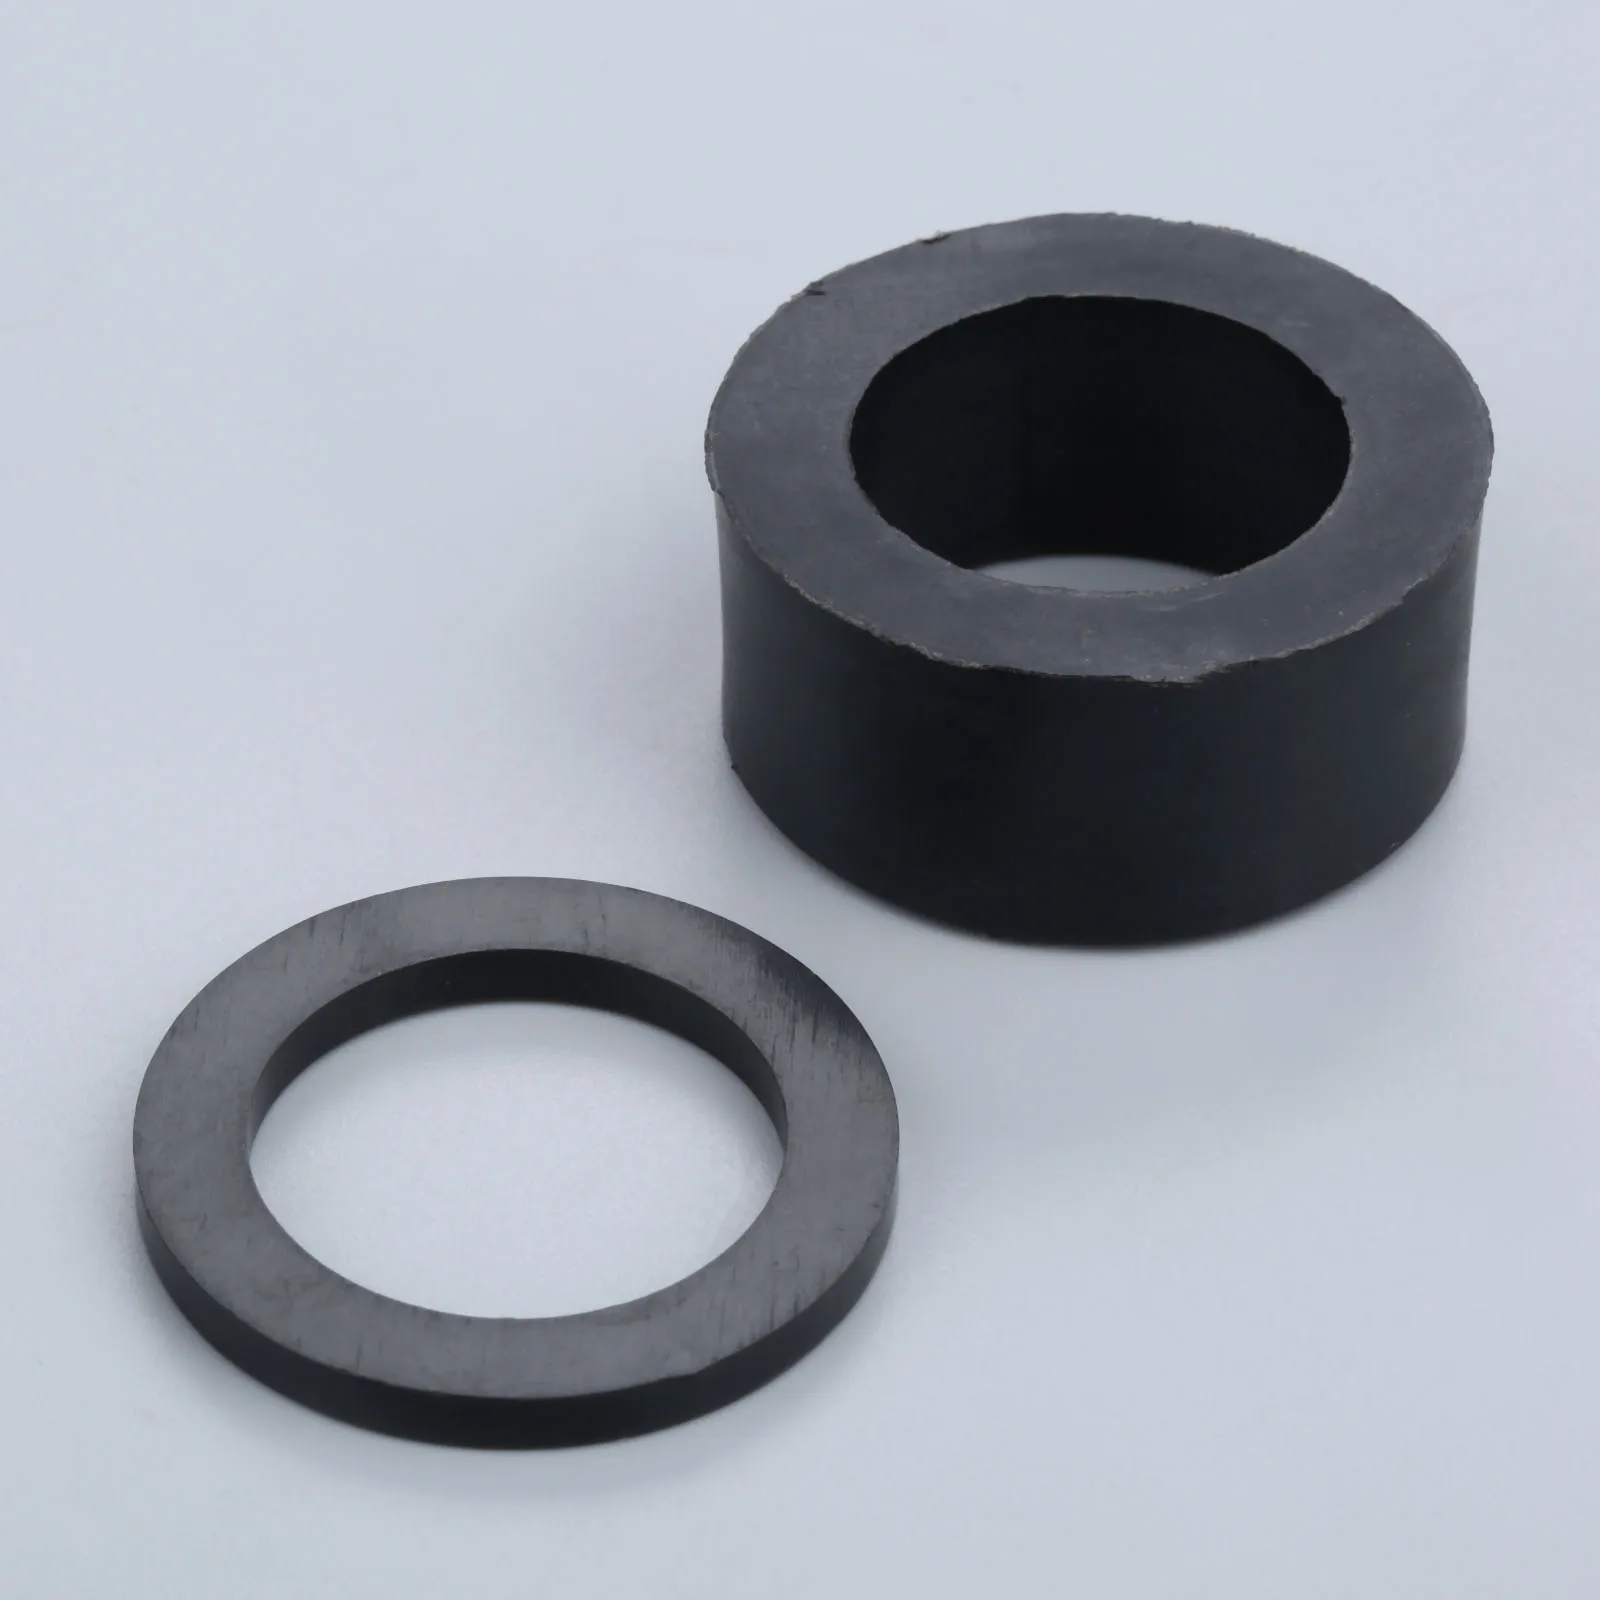 Details about   Canoe Rudder Handle Gasket Ring Kayak Thick &Thin Holding Direction Controller 